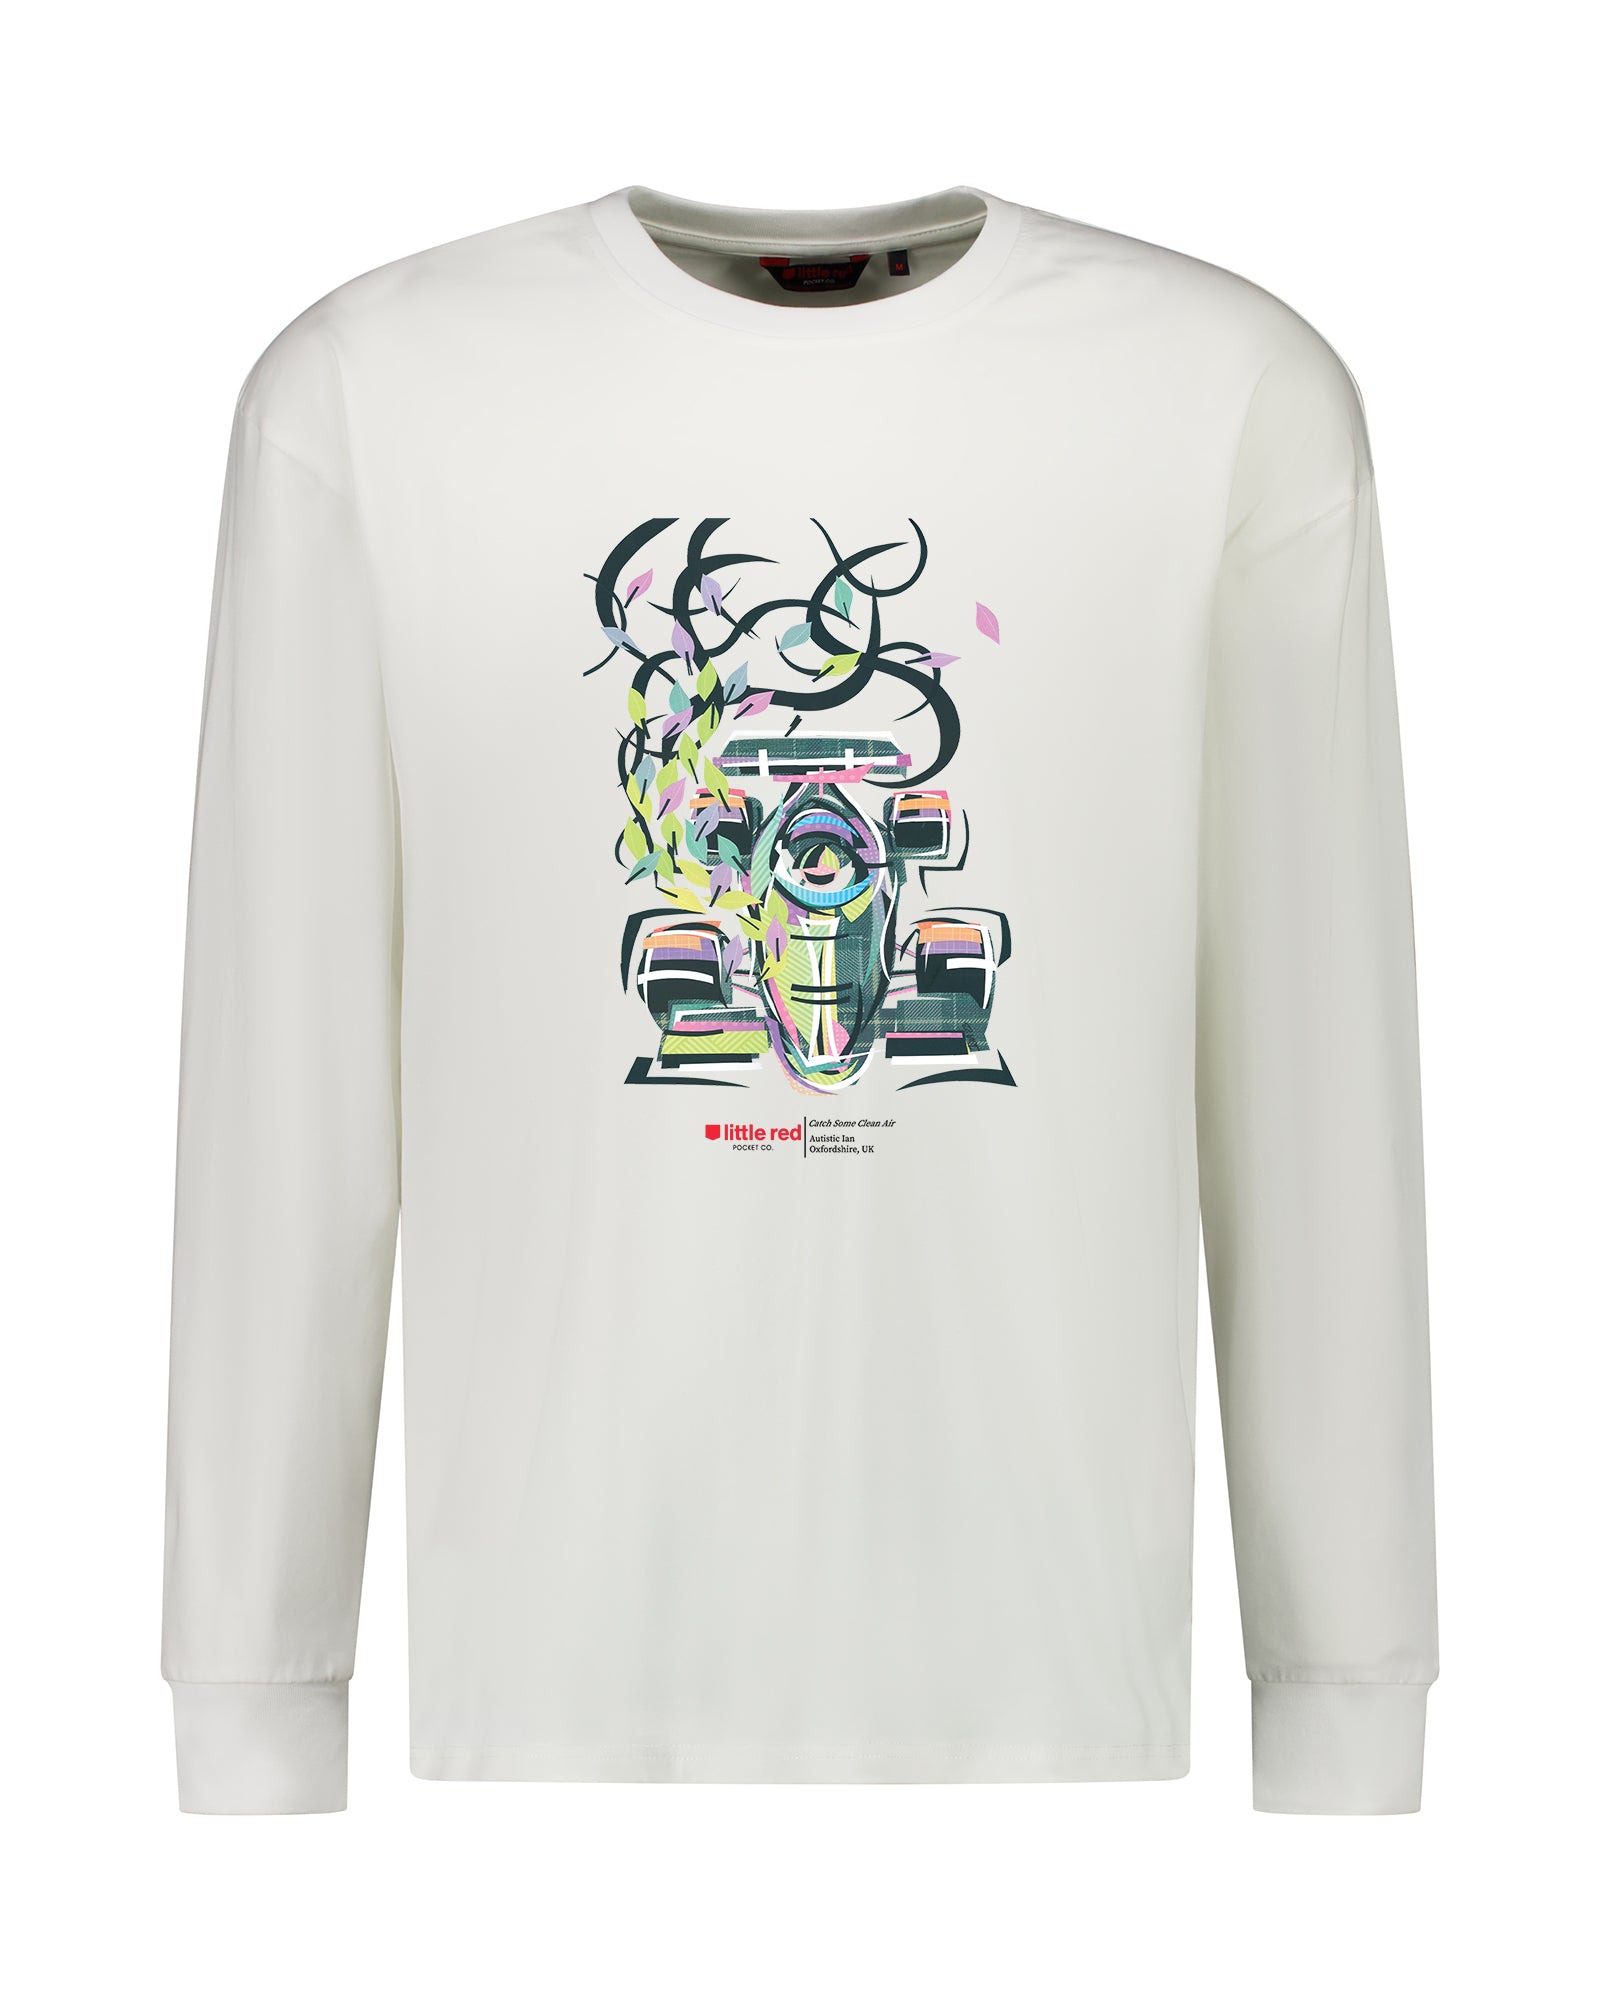 "Catch Some Clean Air" Male Long Sleeve Tee